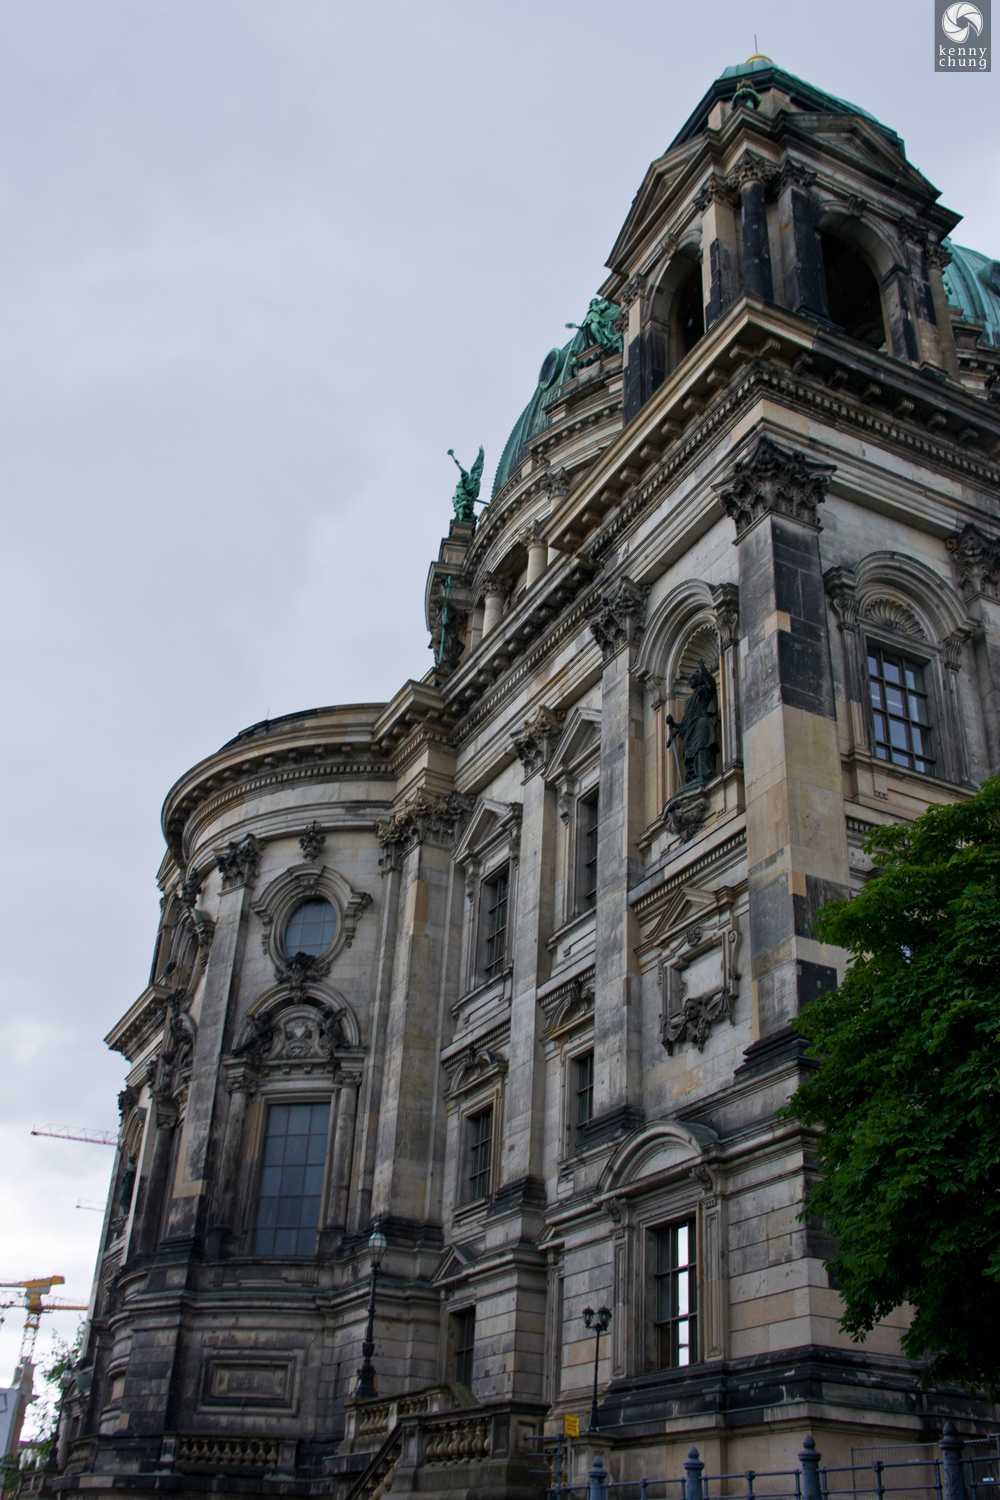 The back of the Berliner Dom (Berlin Cathedral)